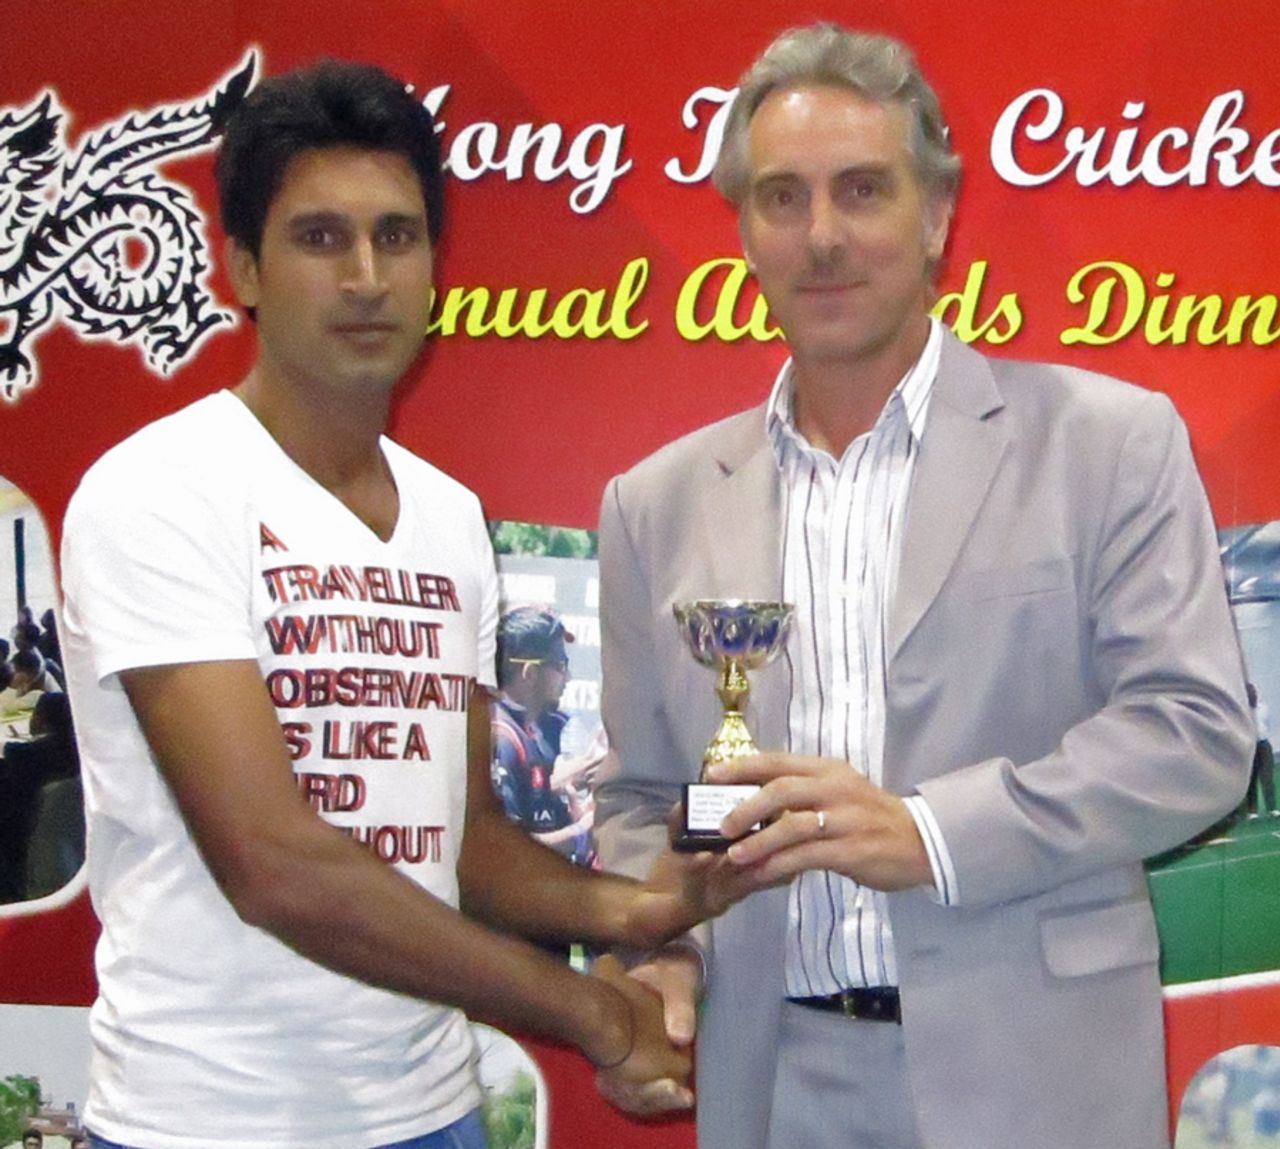 Tanwir Afzal received his Premier League Player of the Year trophy from HAB's Jonathan McKinley during the HKCA 2012-13 Awards Dinner held at Kowloon Cricket Club on 5th June 2013